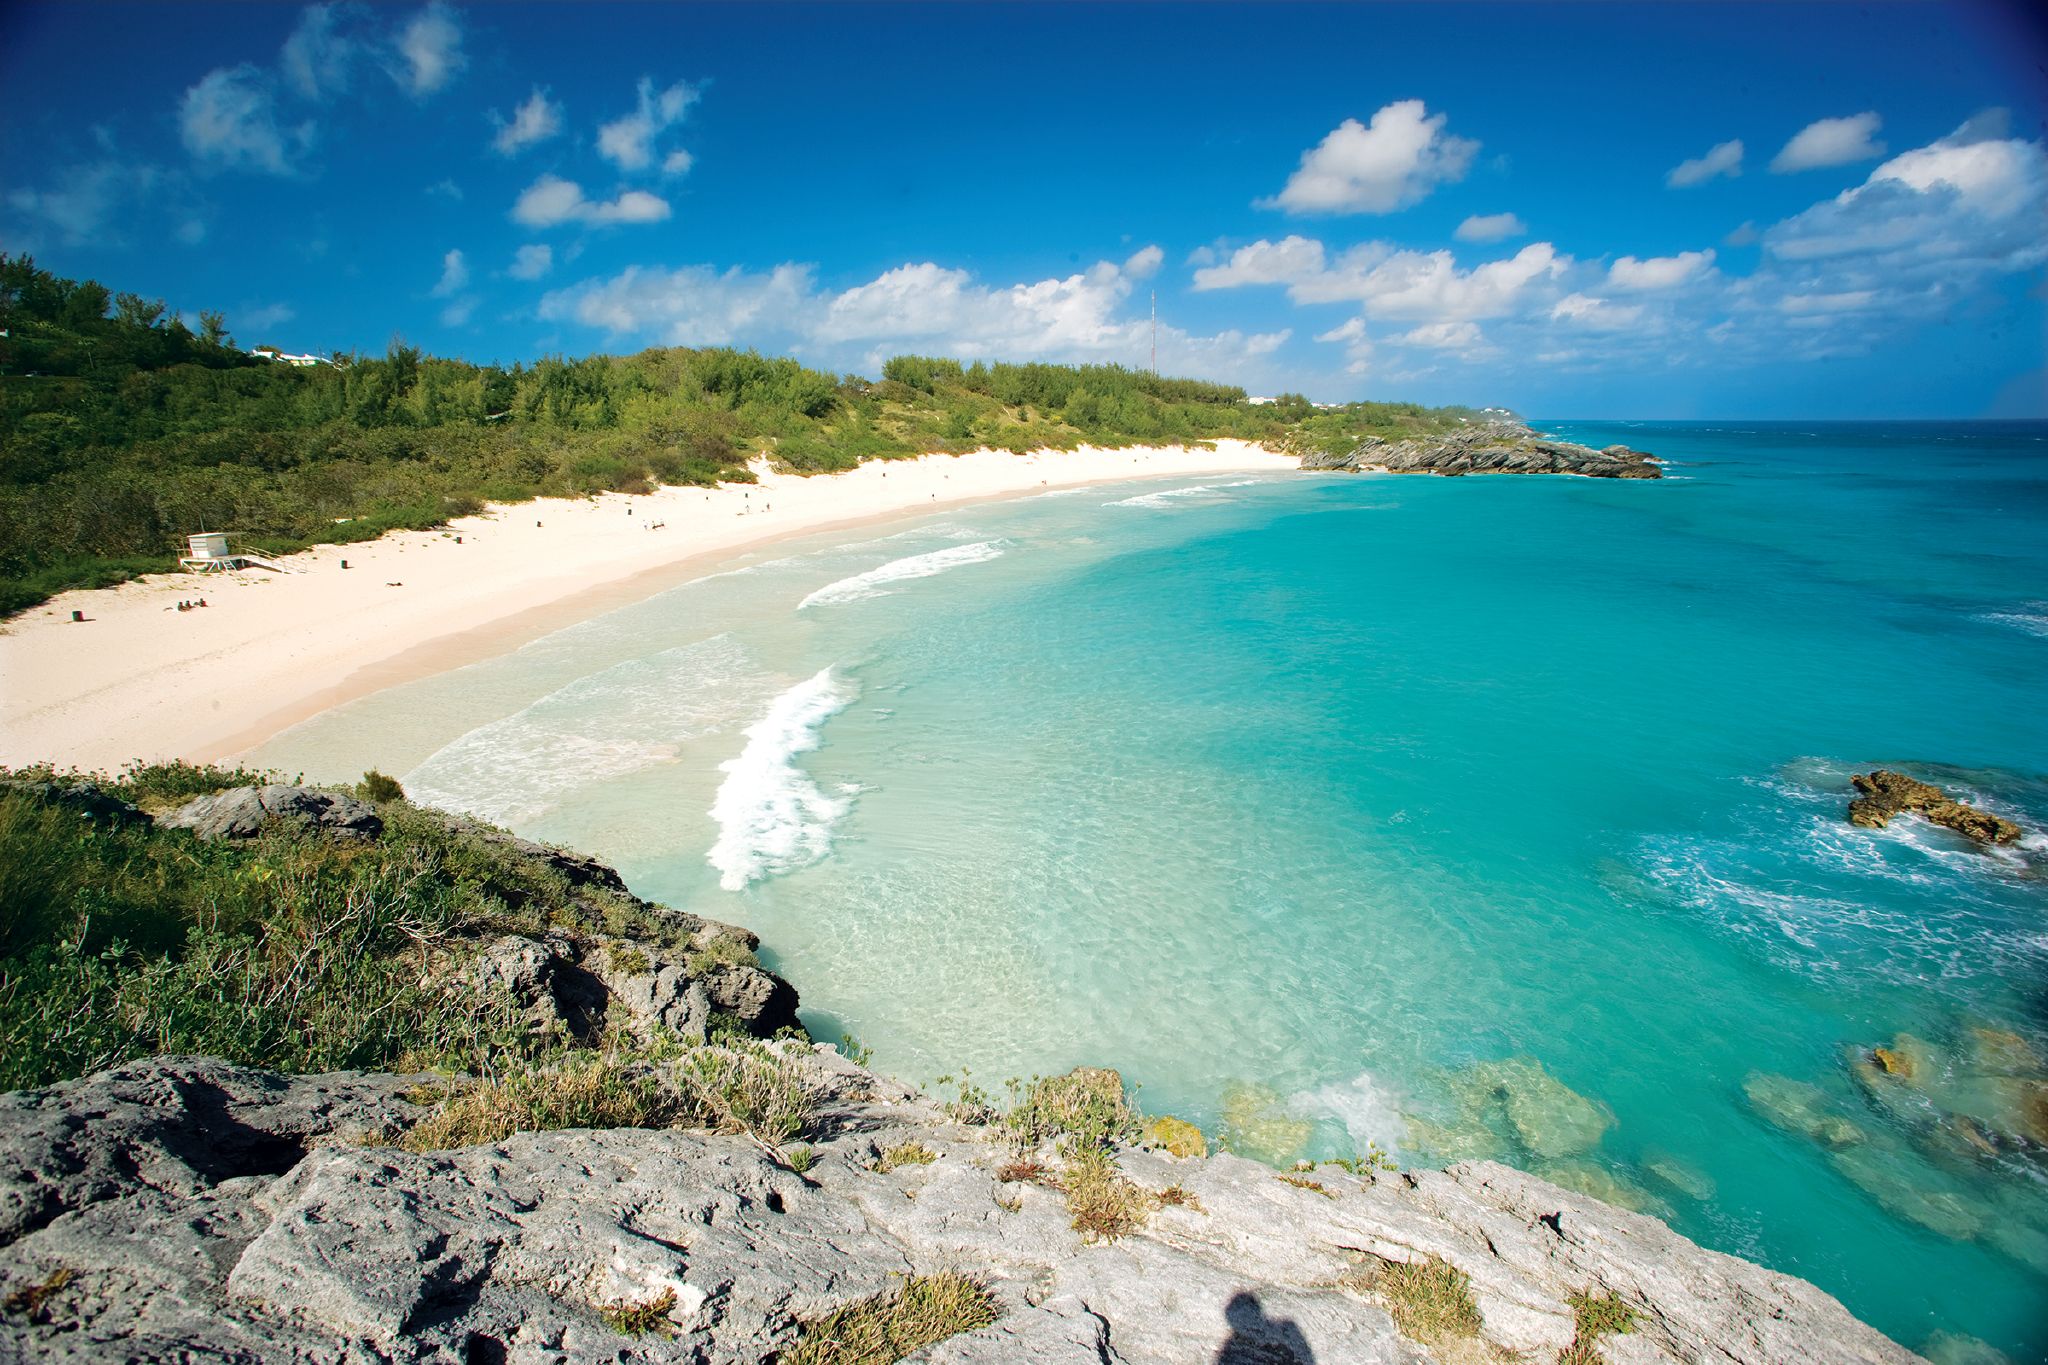 Bermuda: pink beaches, British history and easygoing lifestyle